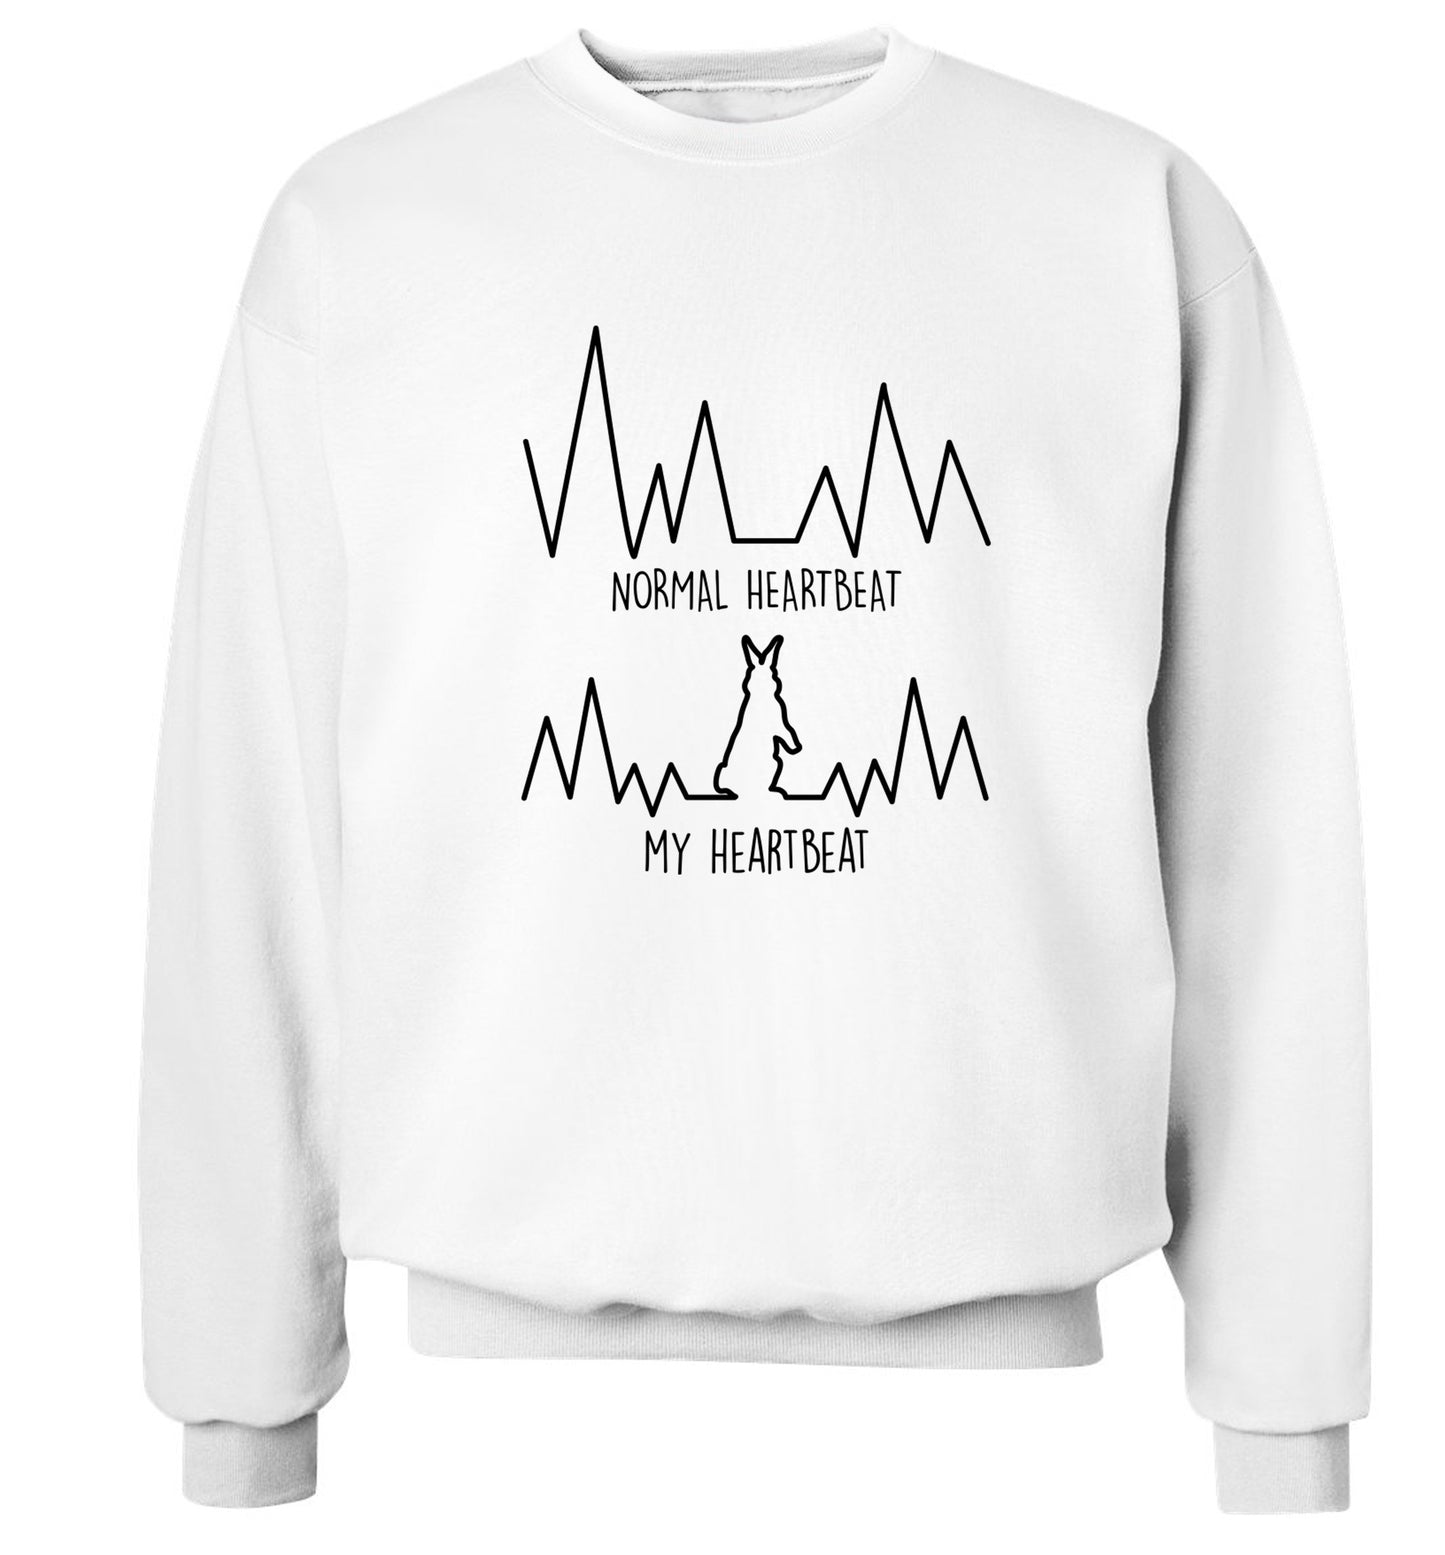 Normal heartbeat, my heartbeat rabbit lover Adult's unisex white  sweater 2XL